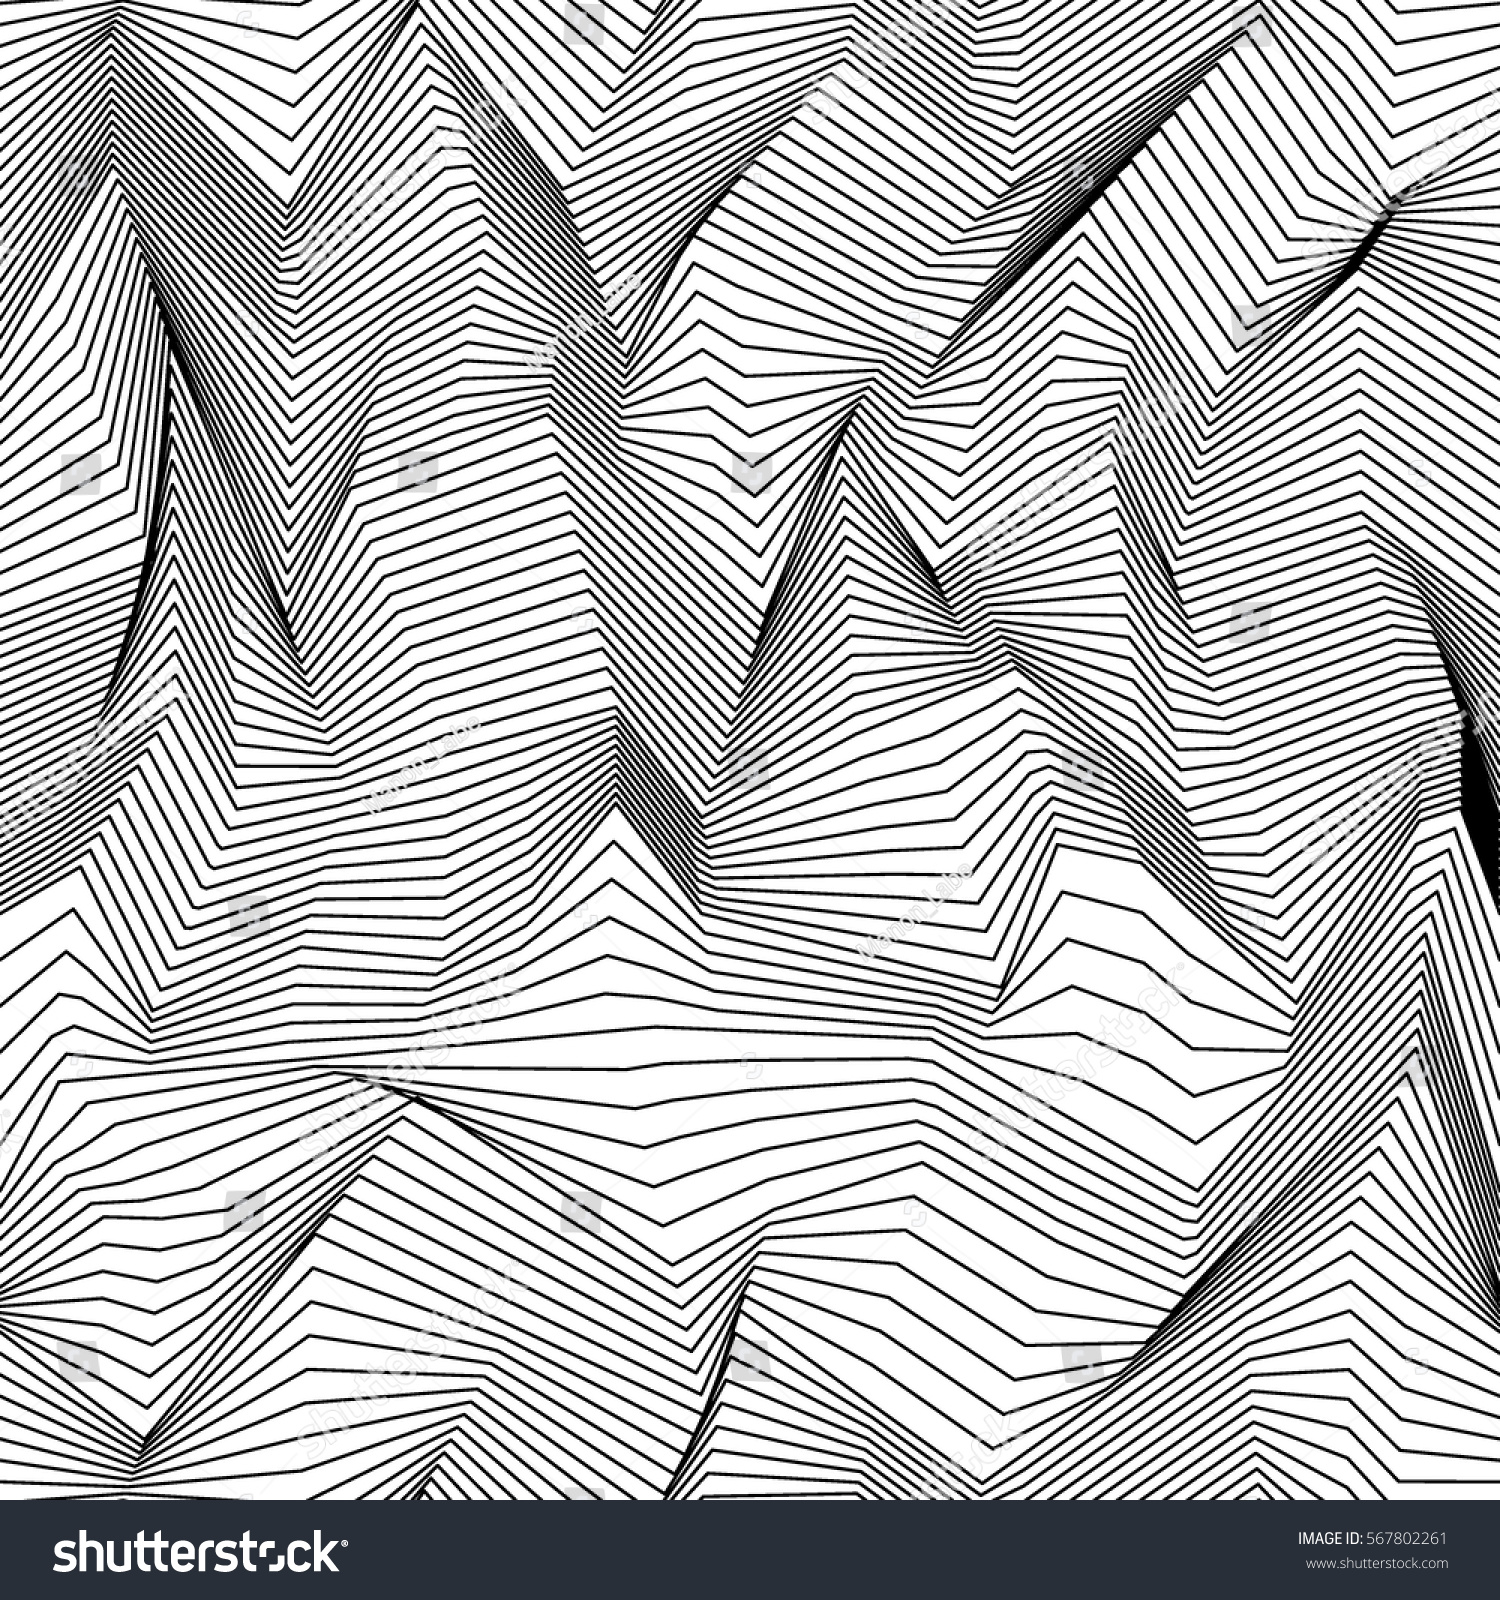 Abstract Horizontal Zigzag Wave Shape Moire Stock Vector 567802261 ...